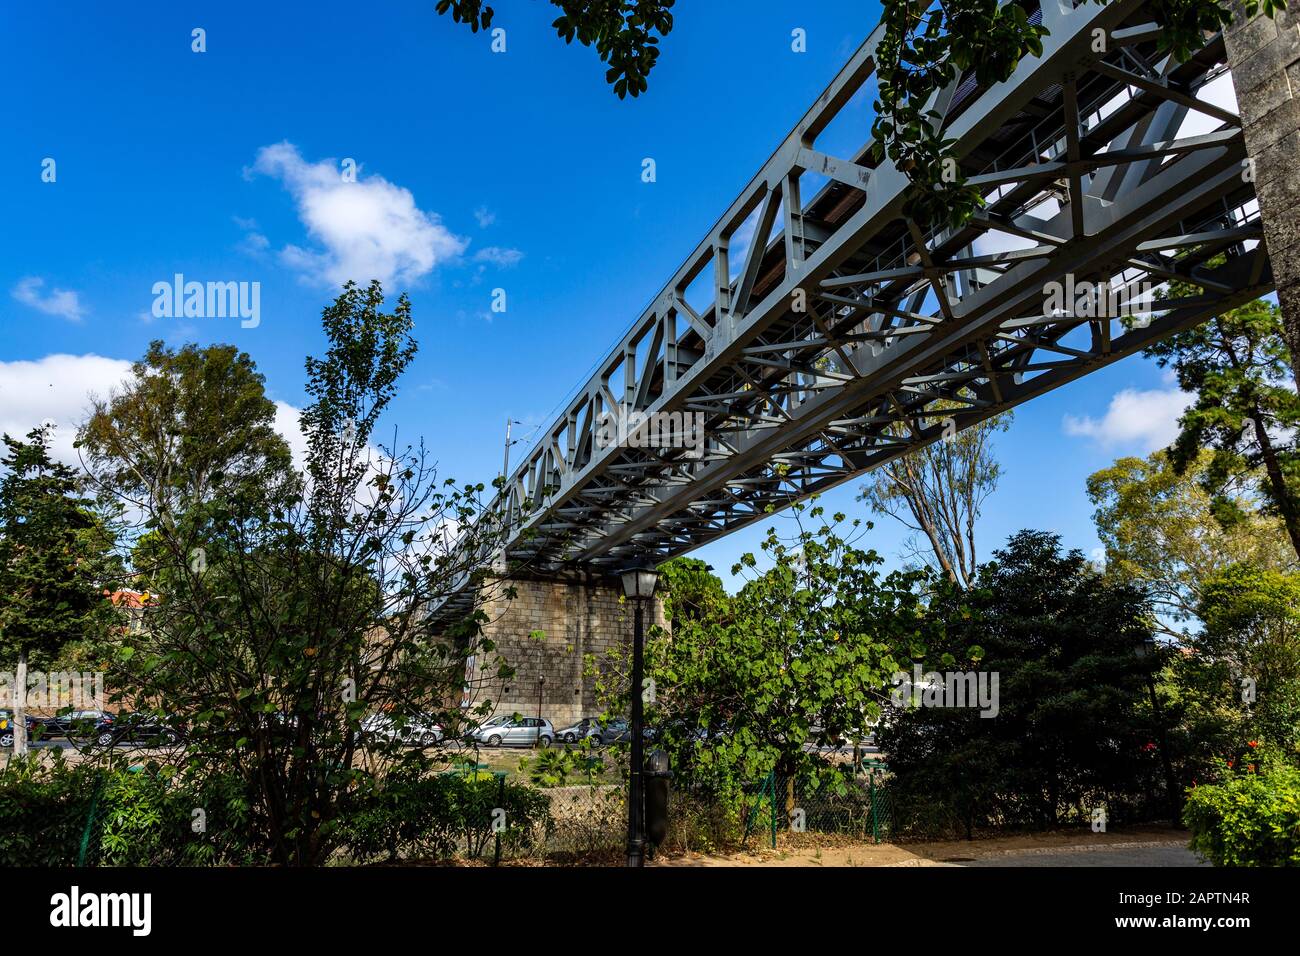 View from underneath of the 127m long metallic railway bridge, opened in 1889, in Oeiras, Portugal Stock Photo